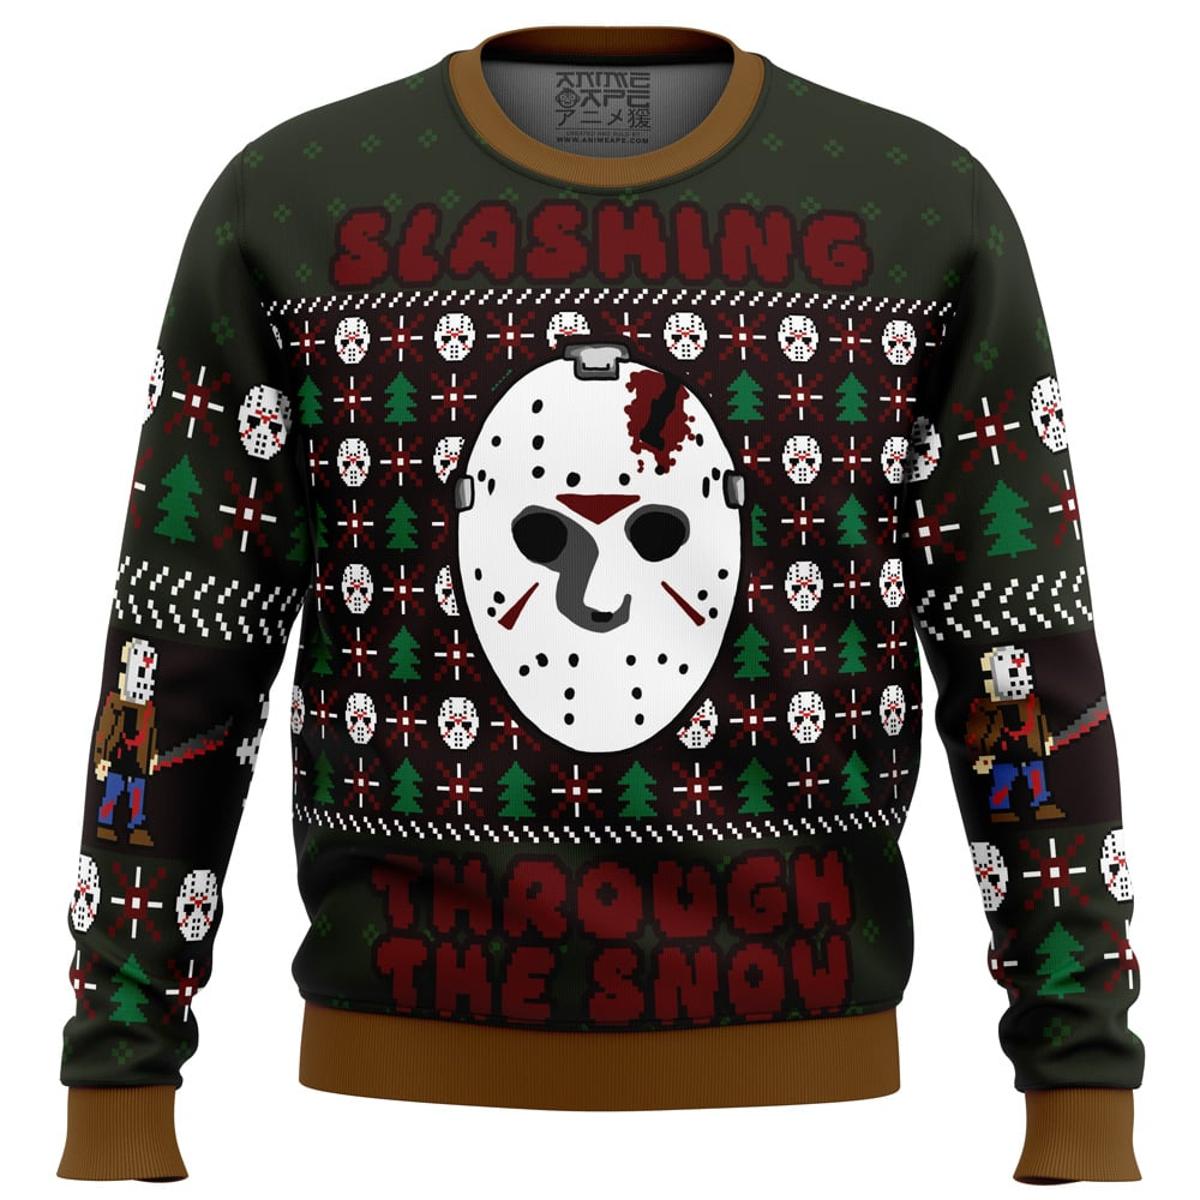 Slashing Through The Snow Jason Voorhees Friday The 13th Series Ugly Xmas Sweater Gift For Fans